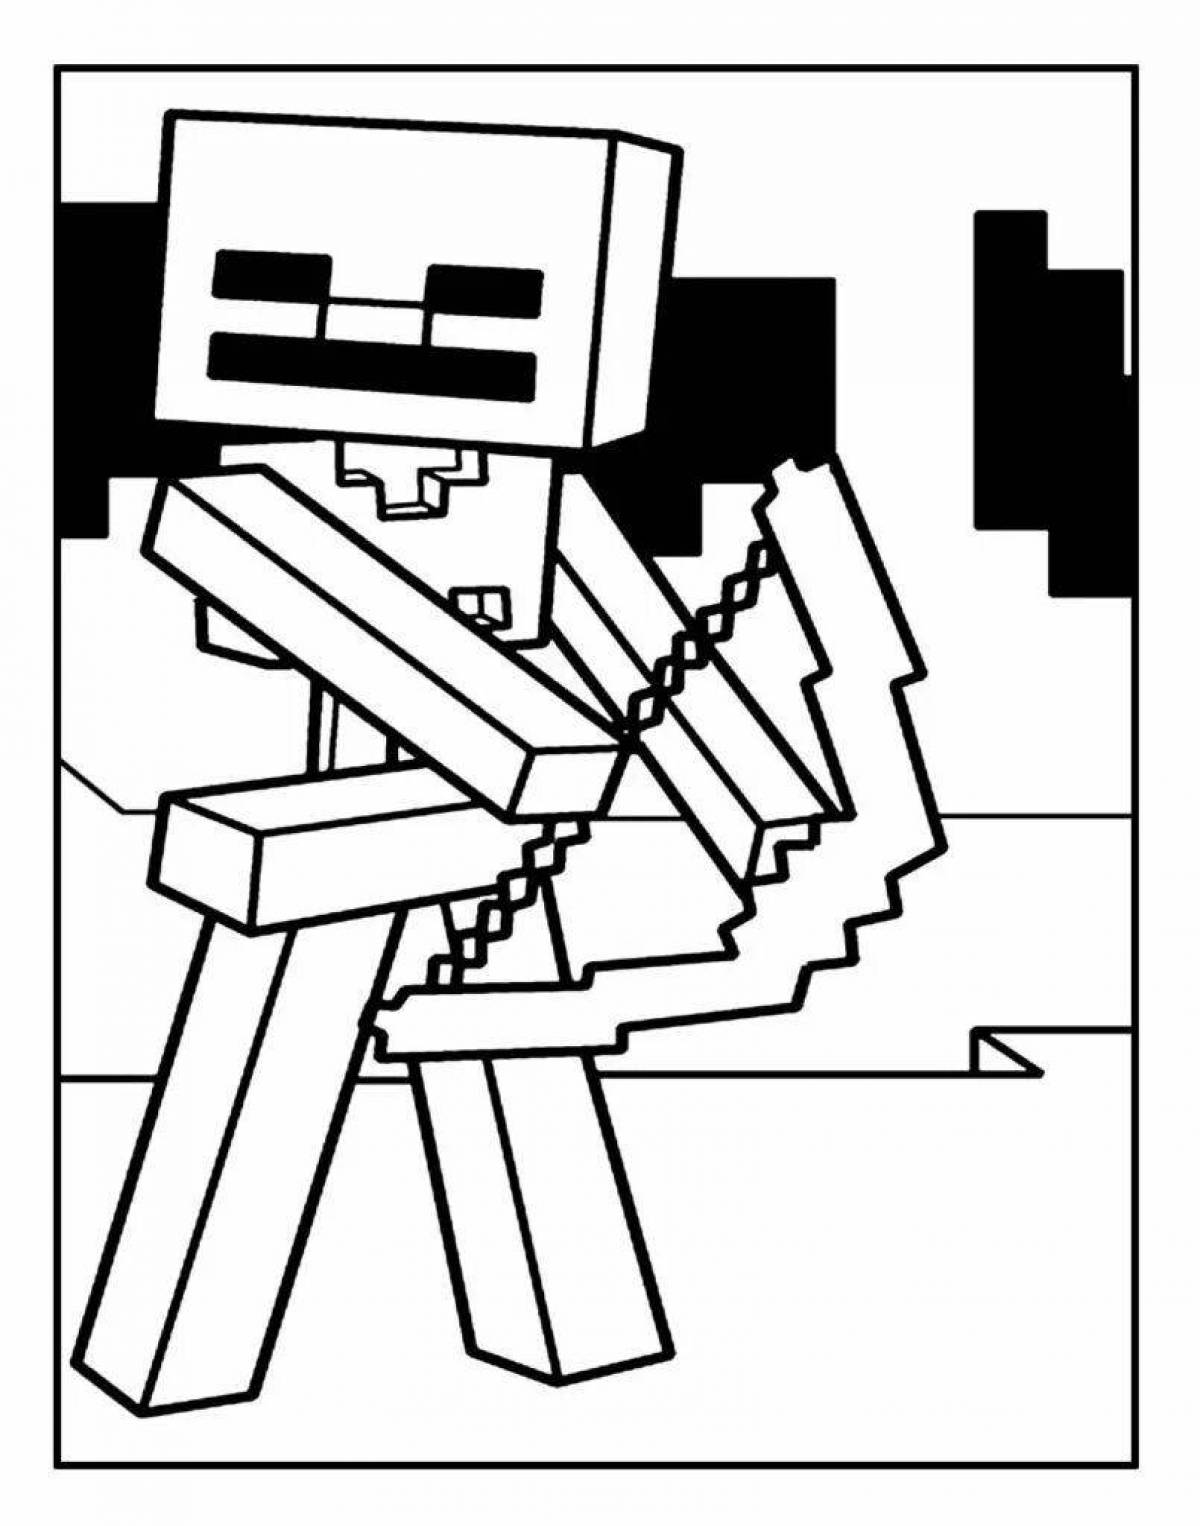 Cute minecraft cover coloring page